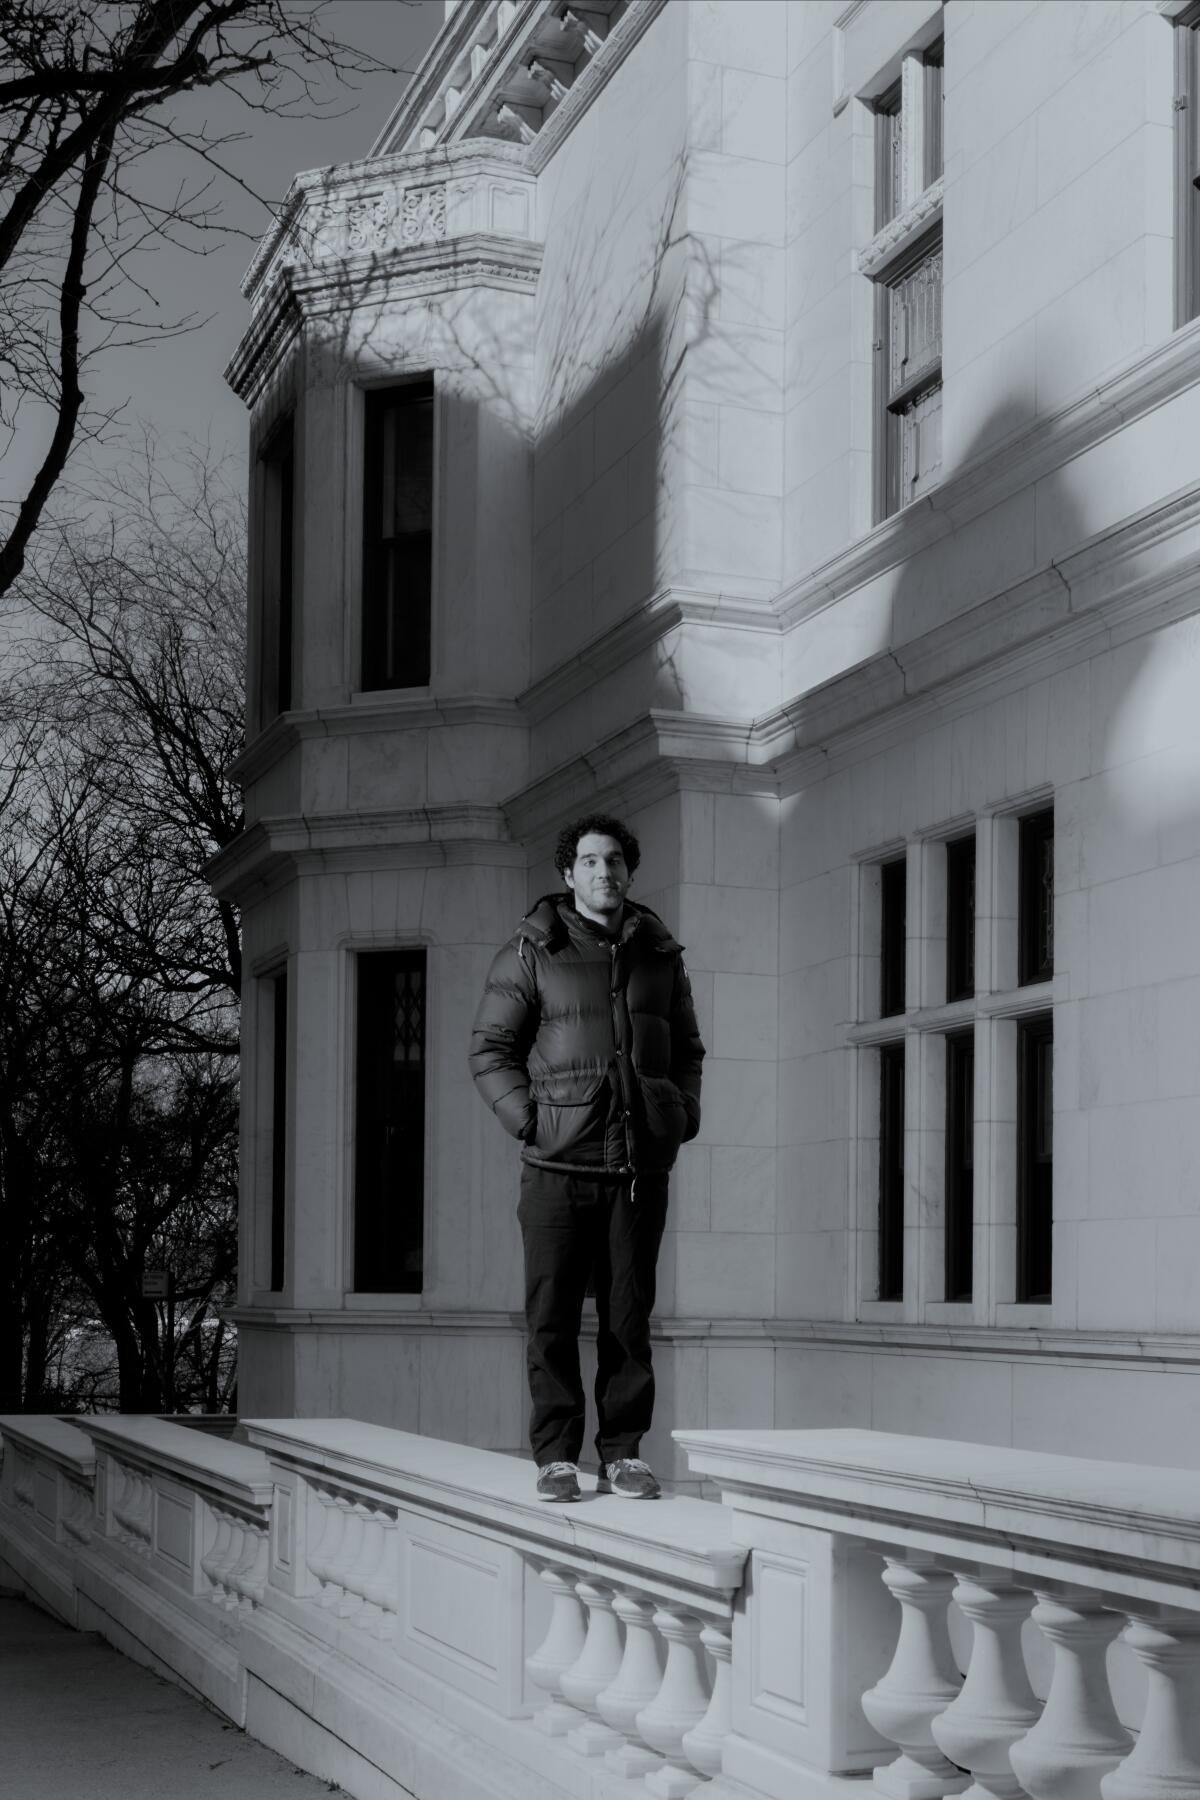 Benny Safdie stands on a wide carved railing outside a townhouse.